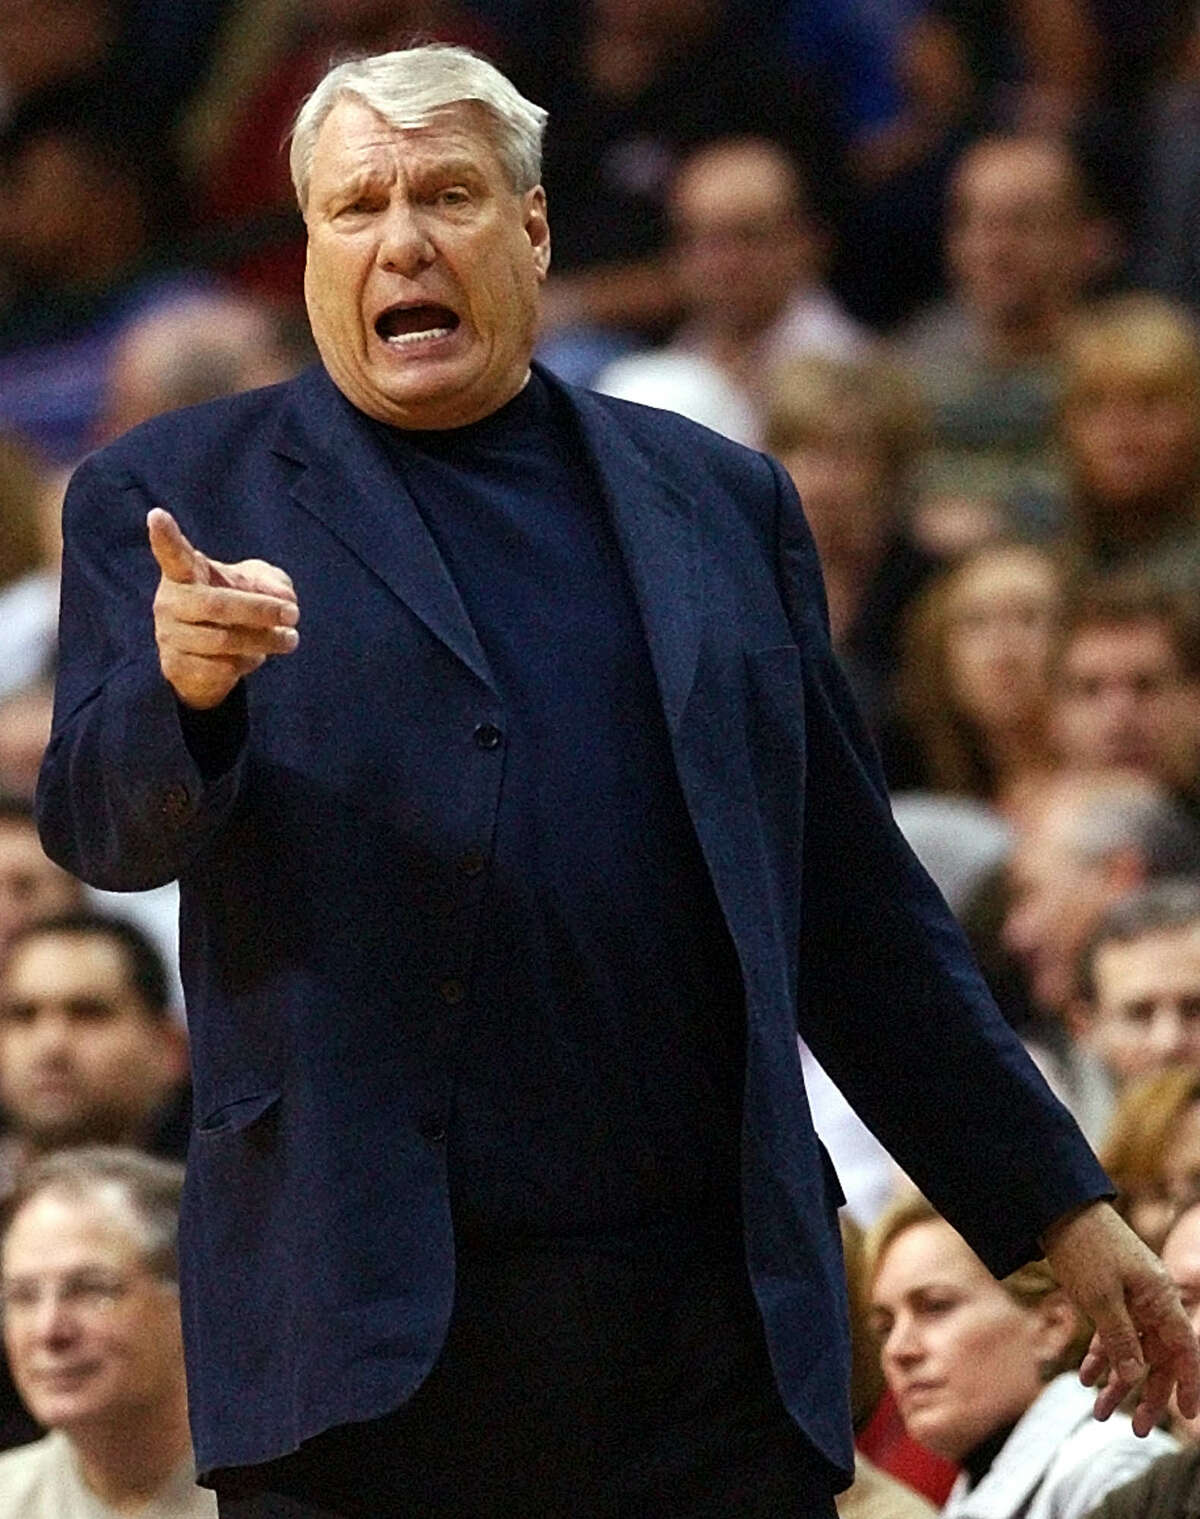 Dallas Mavericks head coach Don Nelson shouts directions during the first half against the Chicago Bulls in Dallas, in this Feb. 8, 2005 file photo. The Golden State Warriors will re-hire Nelson, the second-winningest coach in NBA history and the last coach to lead the downtrodden Warriors to the playoffs after coach Mike Montgomery was dismissed by the Warriors on Tuesday, Aug. 29, 2006. (AP Photo/LM Otero)